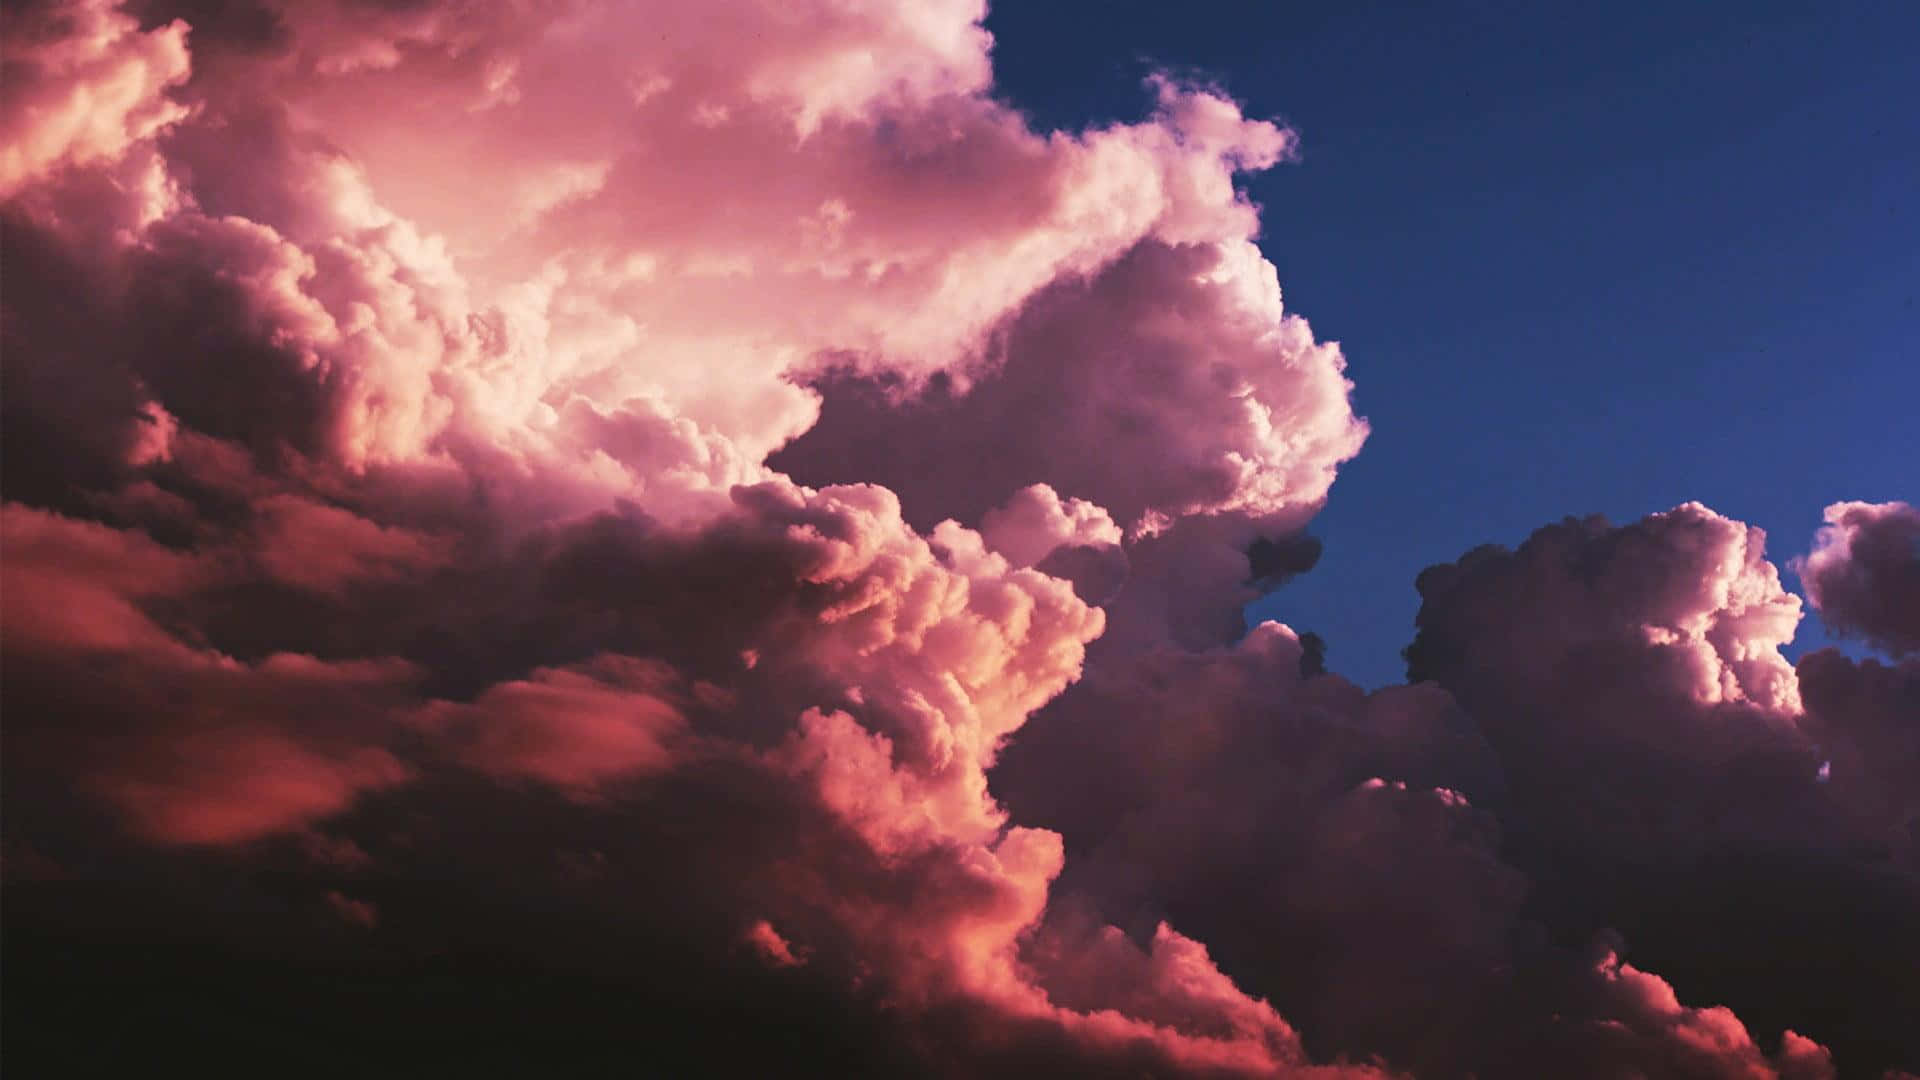 Let Your Dreams Take Flight with Cloud Aesthetic